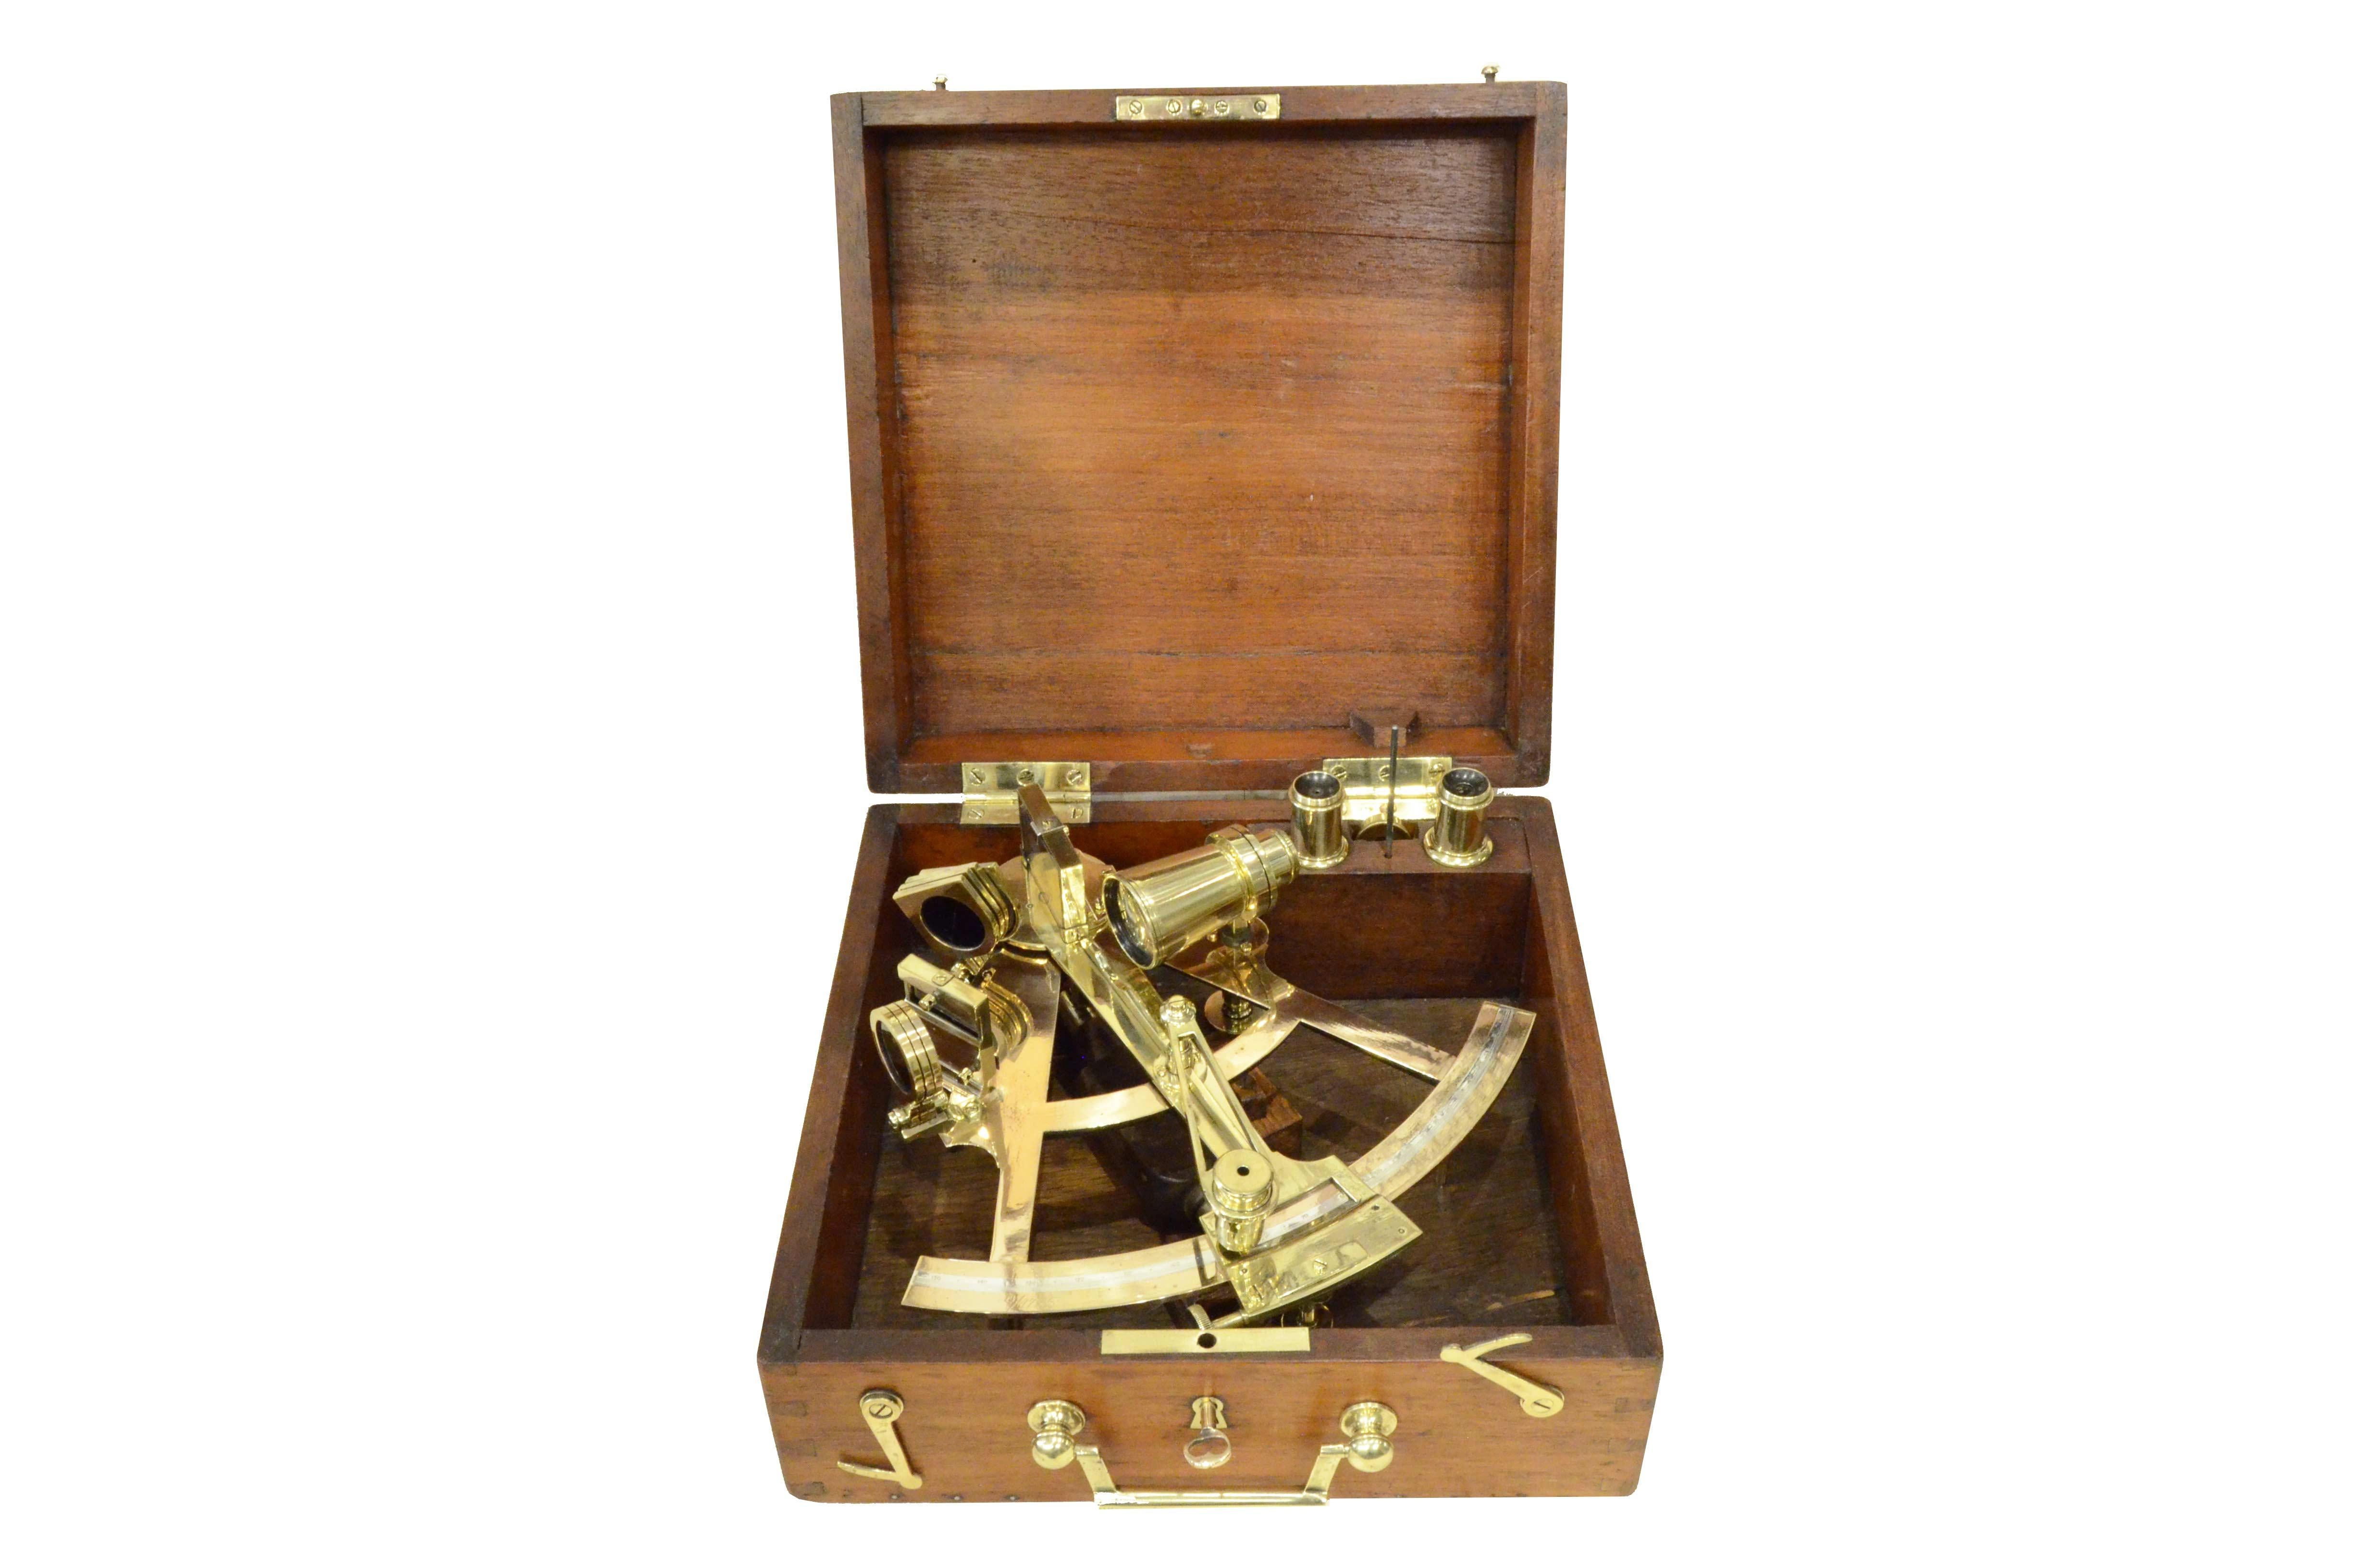 Brass sextant signed Negus New York, datable around 1875, finely manufactured instrument, complete with optics and housed in an elegant original square wood box with closing hooks and lock with brass key. 

Brass frame with engraved silver